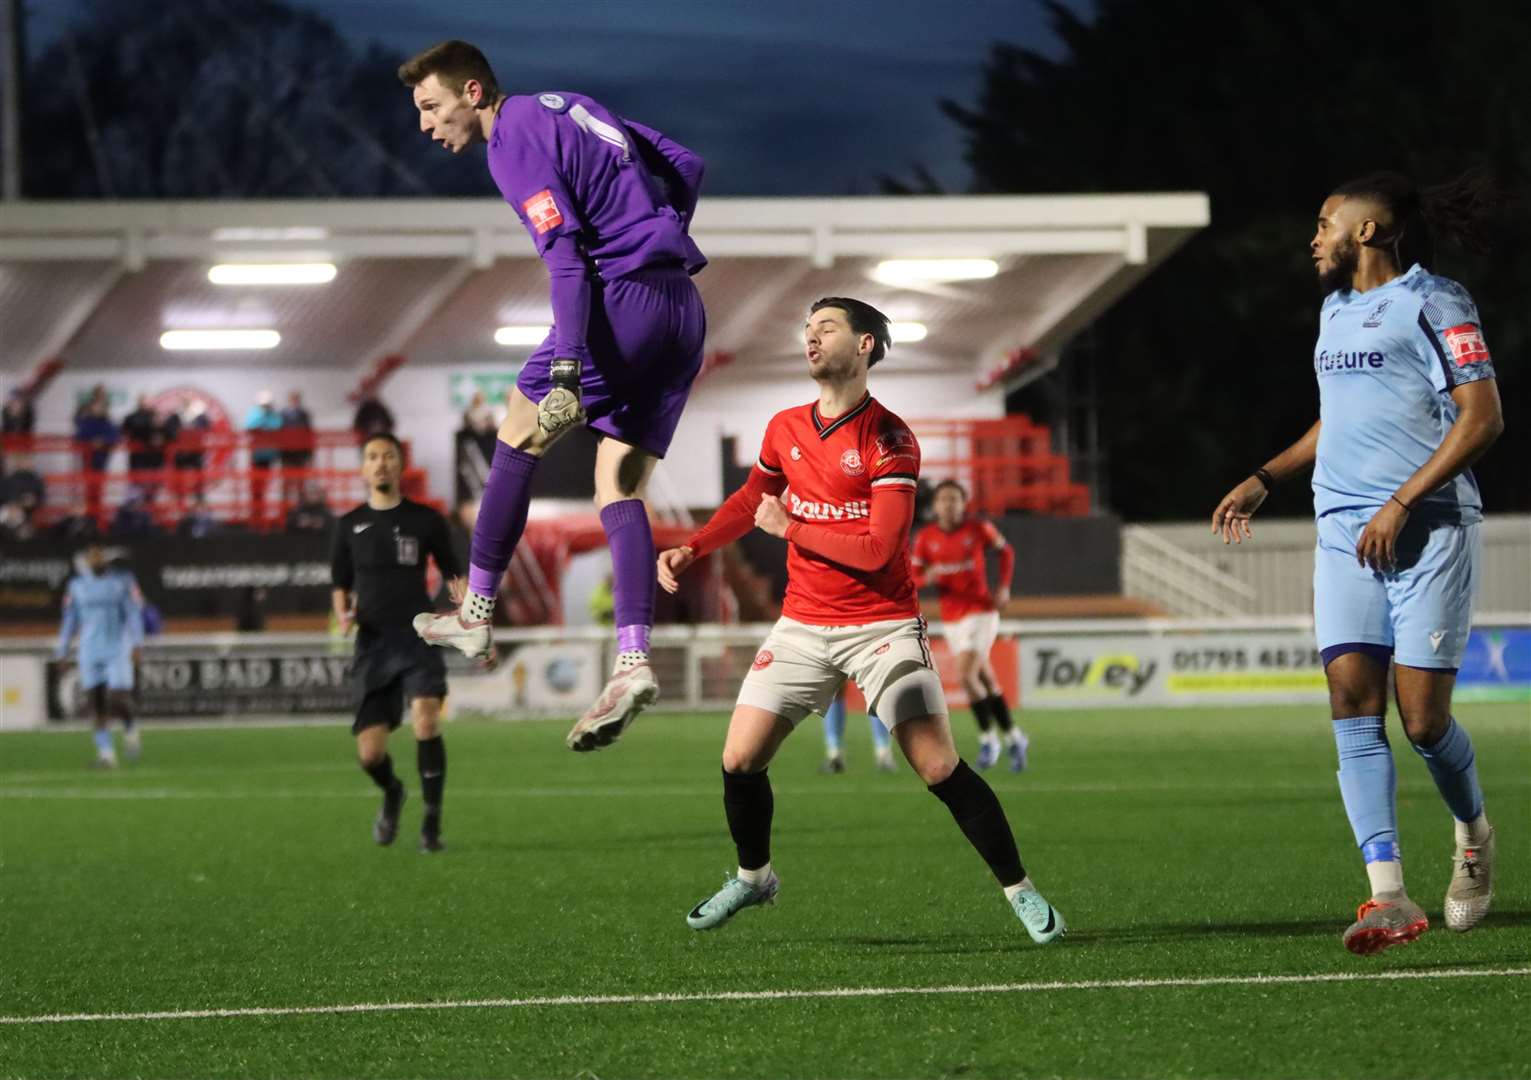 Enfield keeper wins a header off his line as Chatham play Enfield Town Picture: Max English (@max_ePhotos)